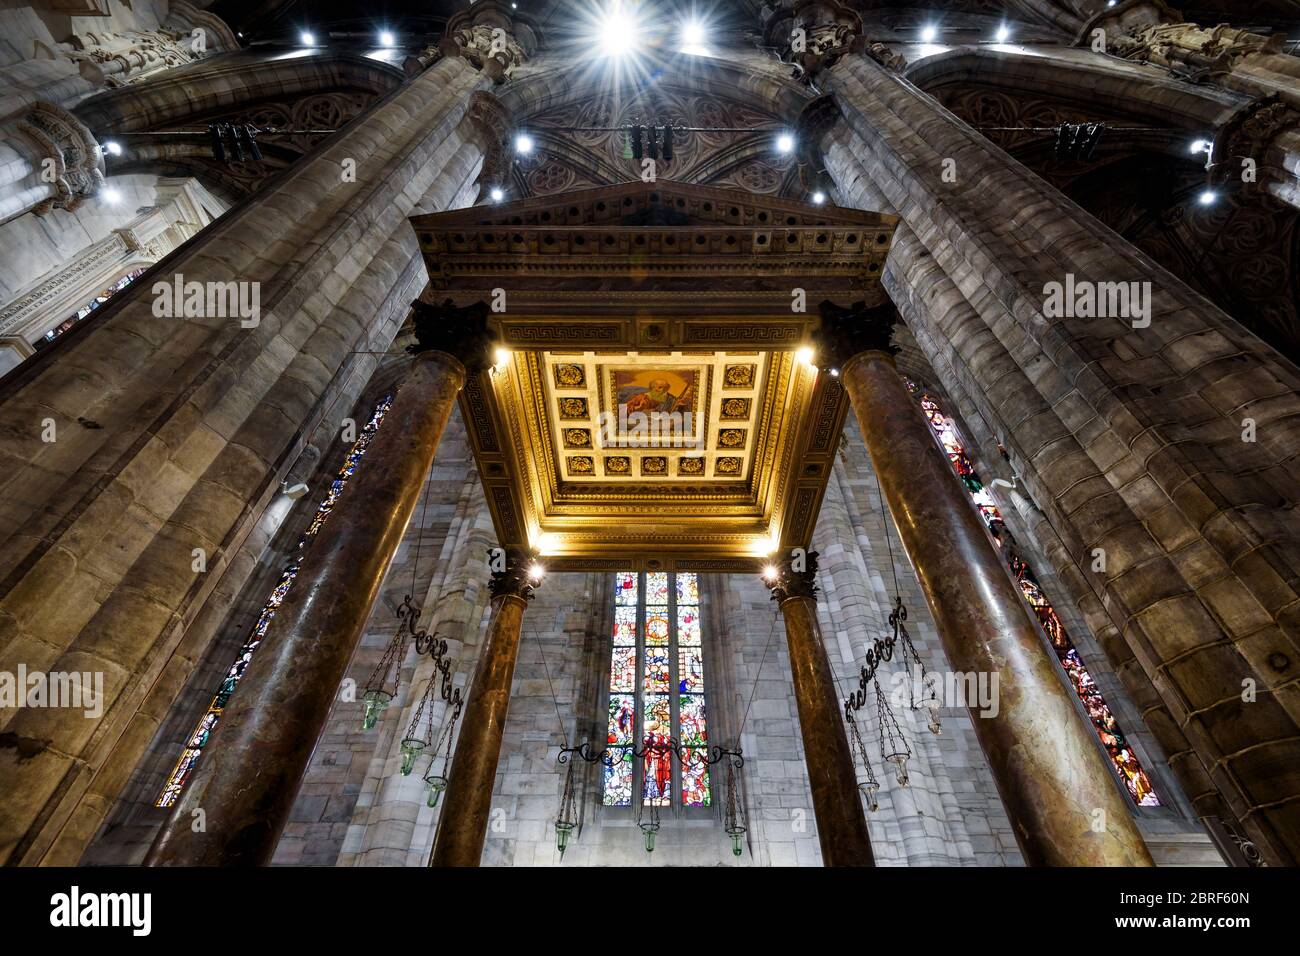 Milan, Italy - May 16, 2017: Interior of the Milan Cathedral (Duomo di Milano). Detail of Baptistery. Milan Duomo is the largest church in Italy and t Stock Photo